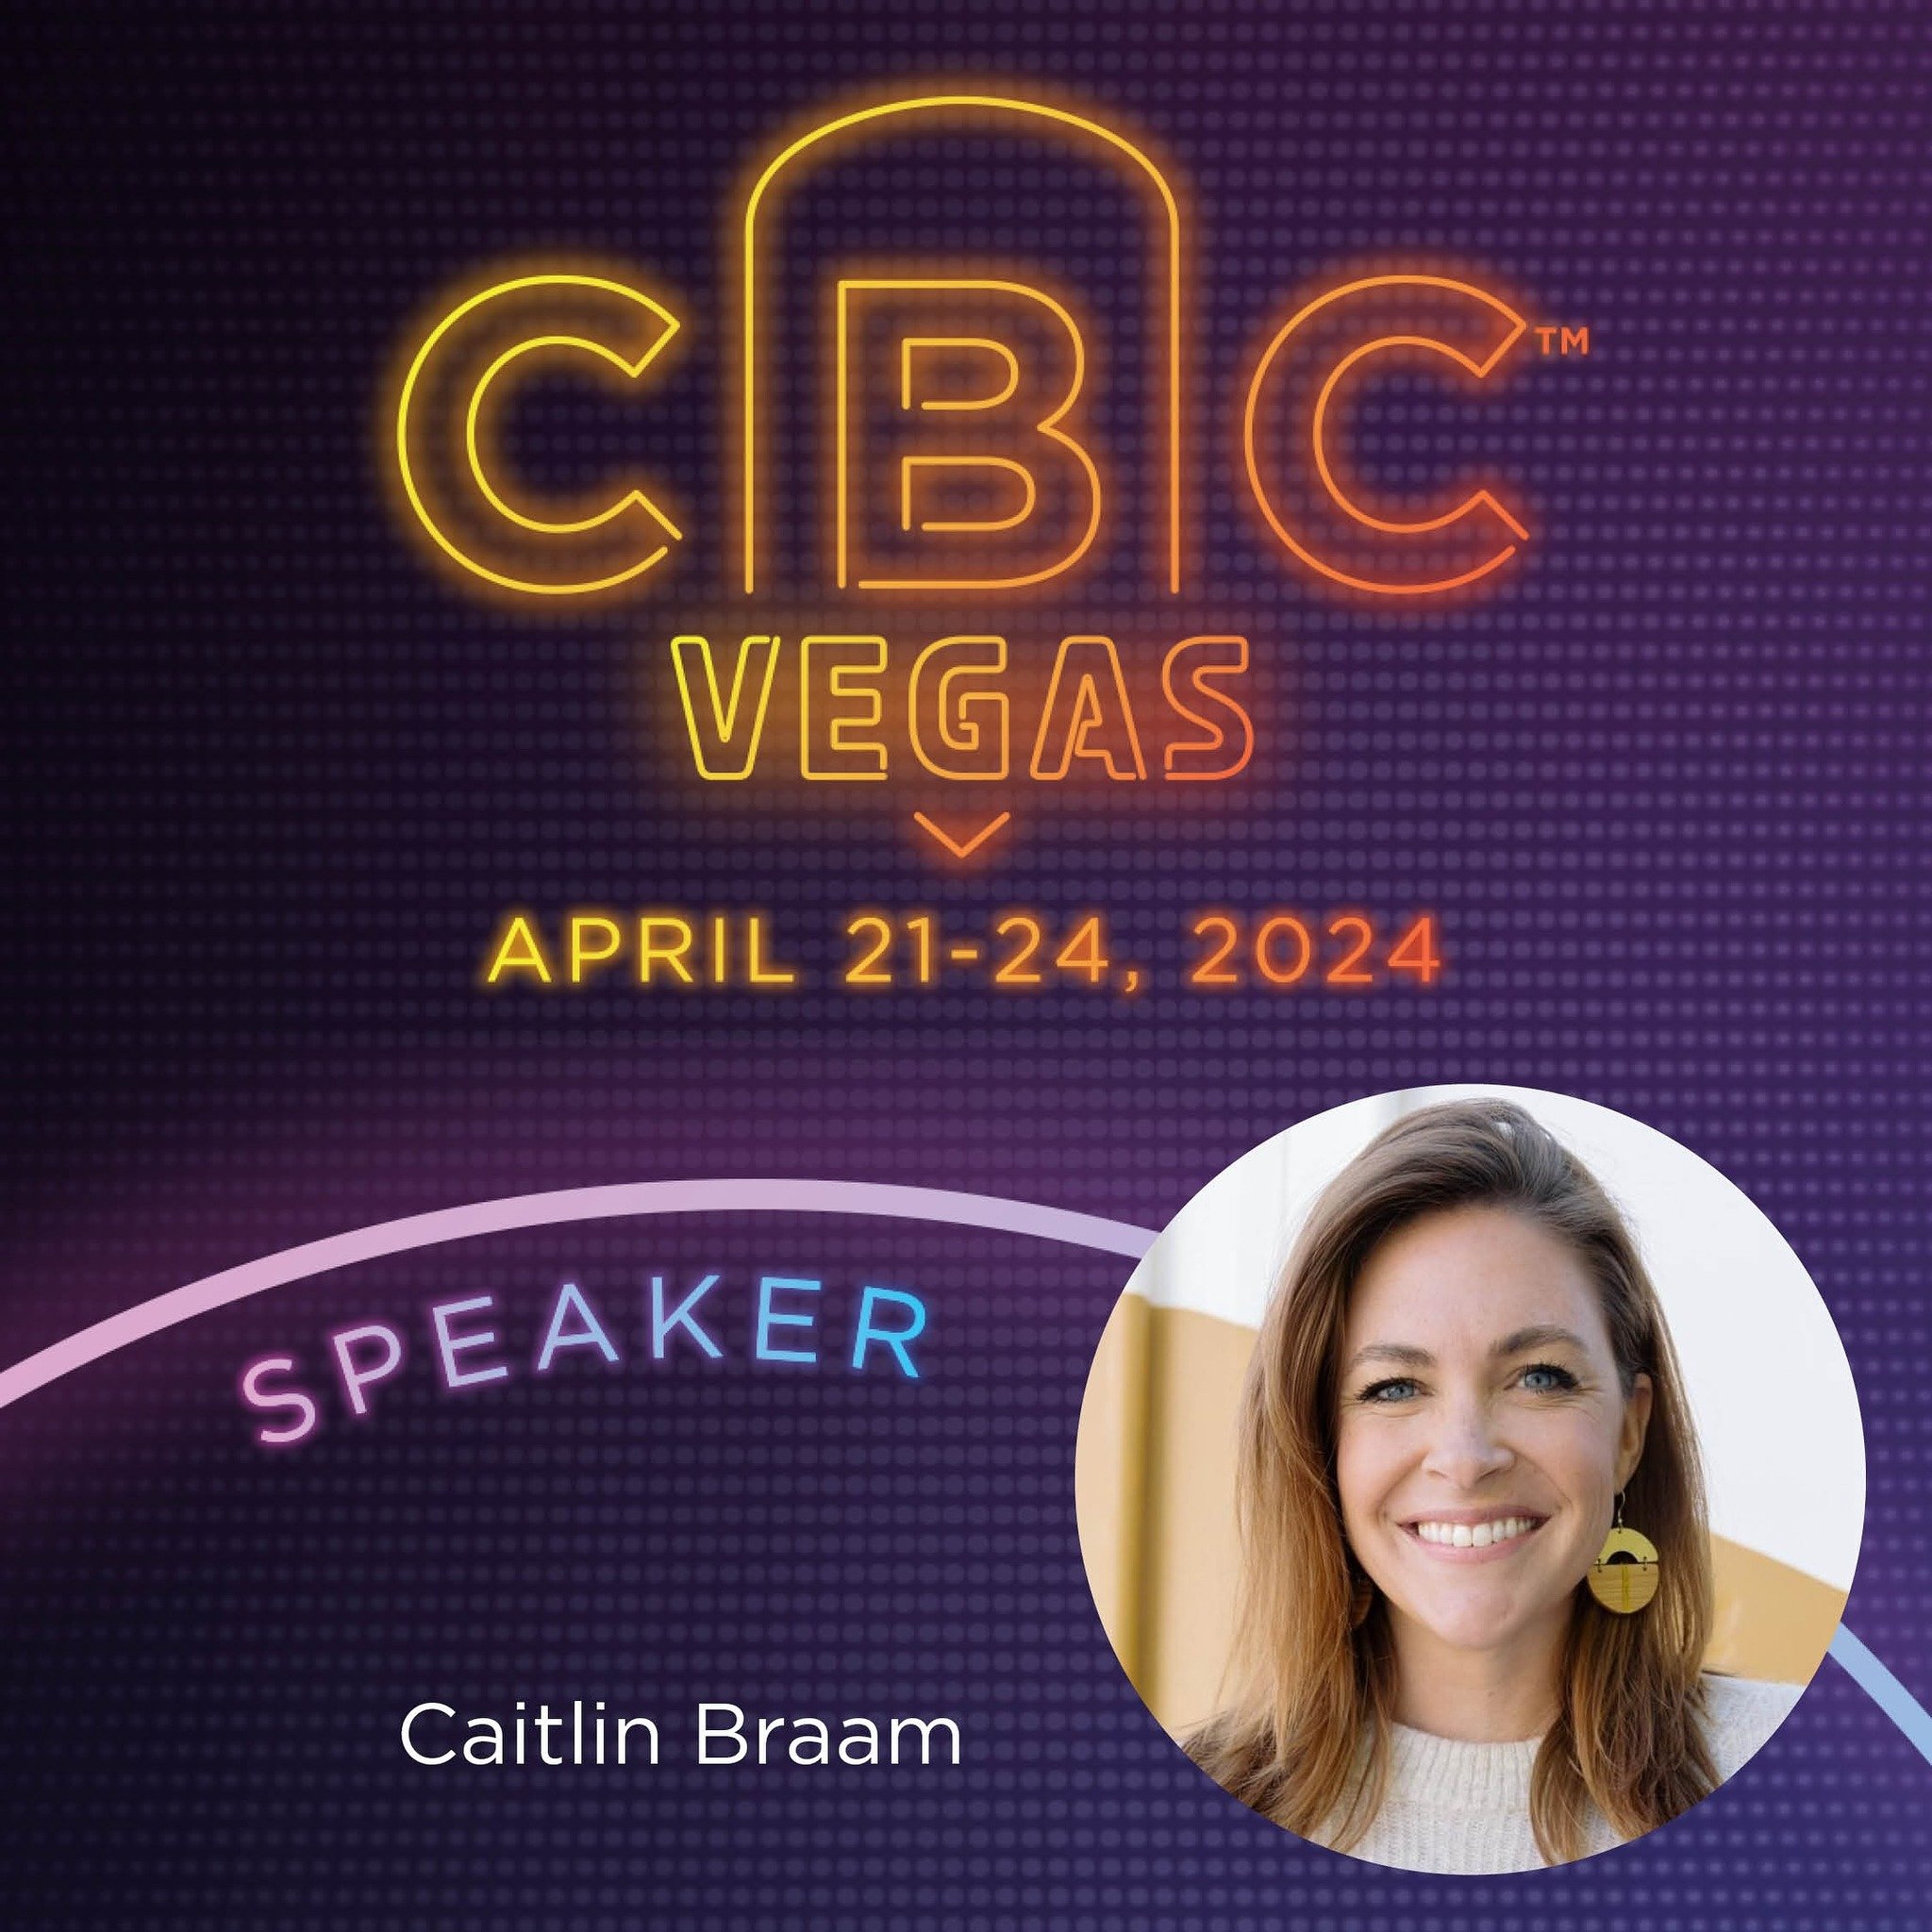 Exciting news! Our very own founder, Caitlin Braam, will be taking the stage at the Craft Brewers Conference next week on Tuesday, April 23 in Las Vegas. She will be sharing valuable insights on innovative business models for expanding cider programs